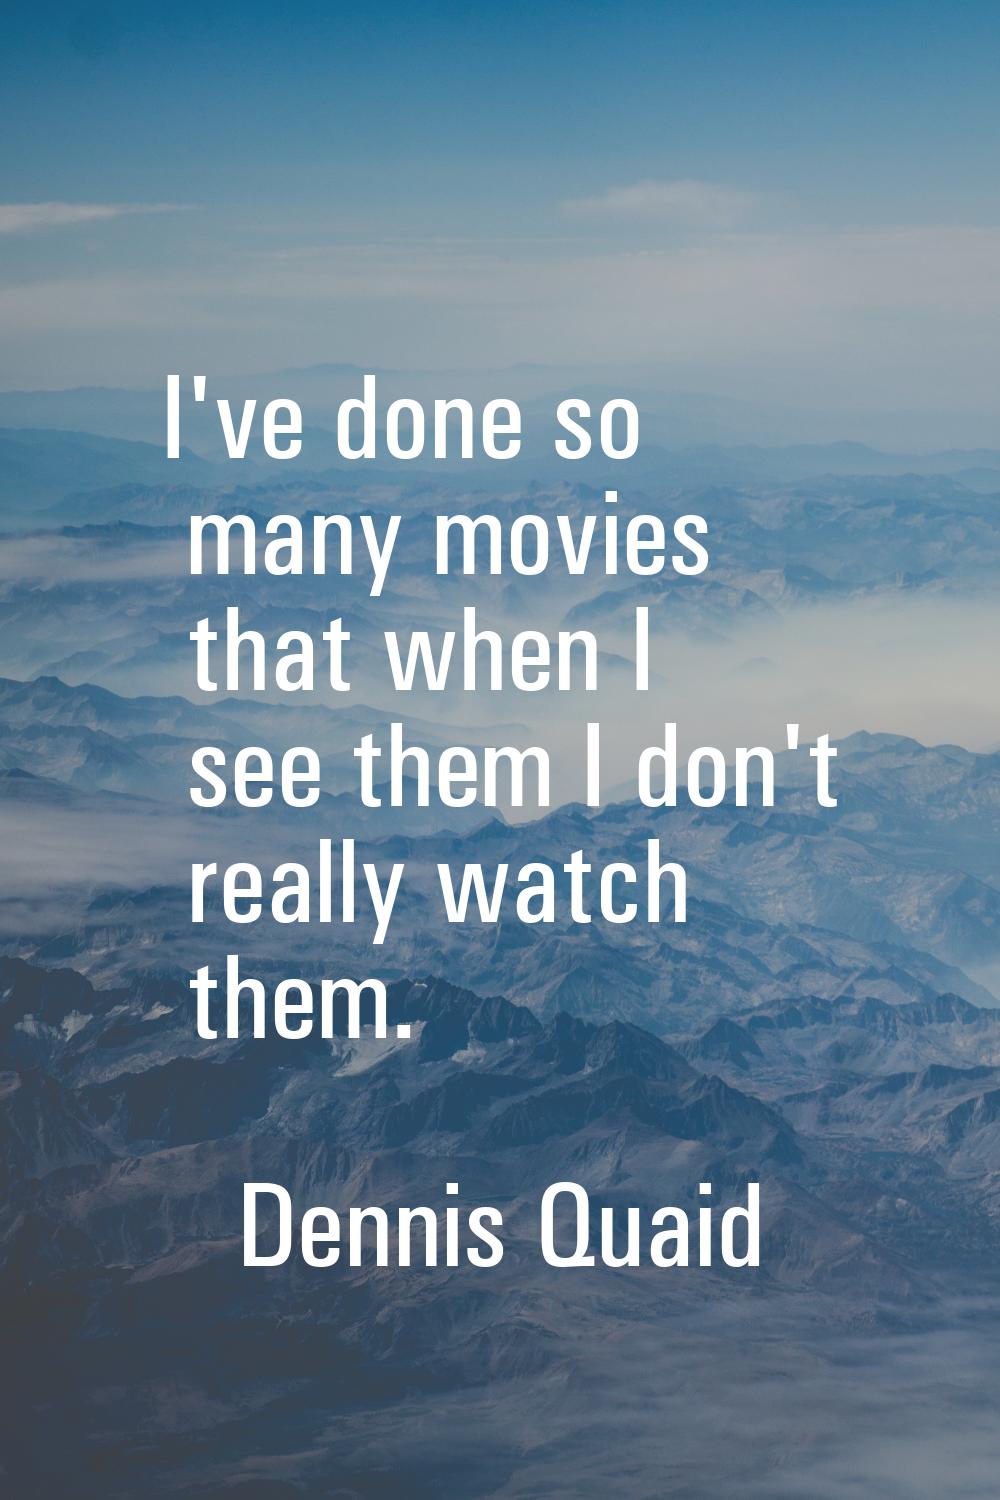 I've done so many movies that when I see them I don't really watch them.